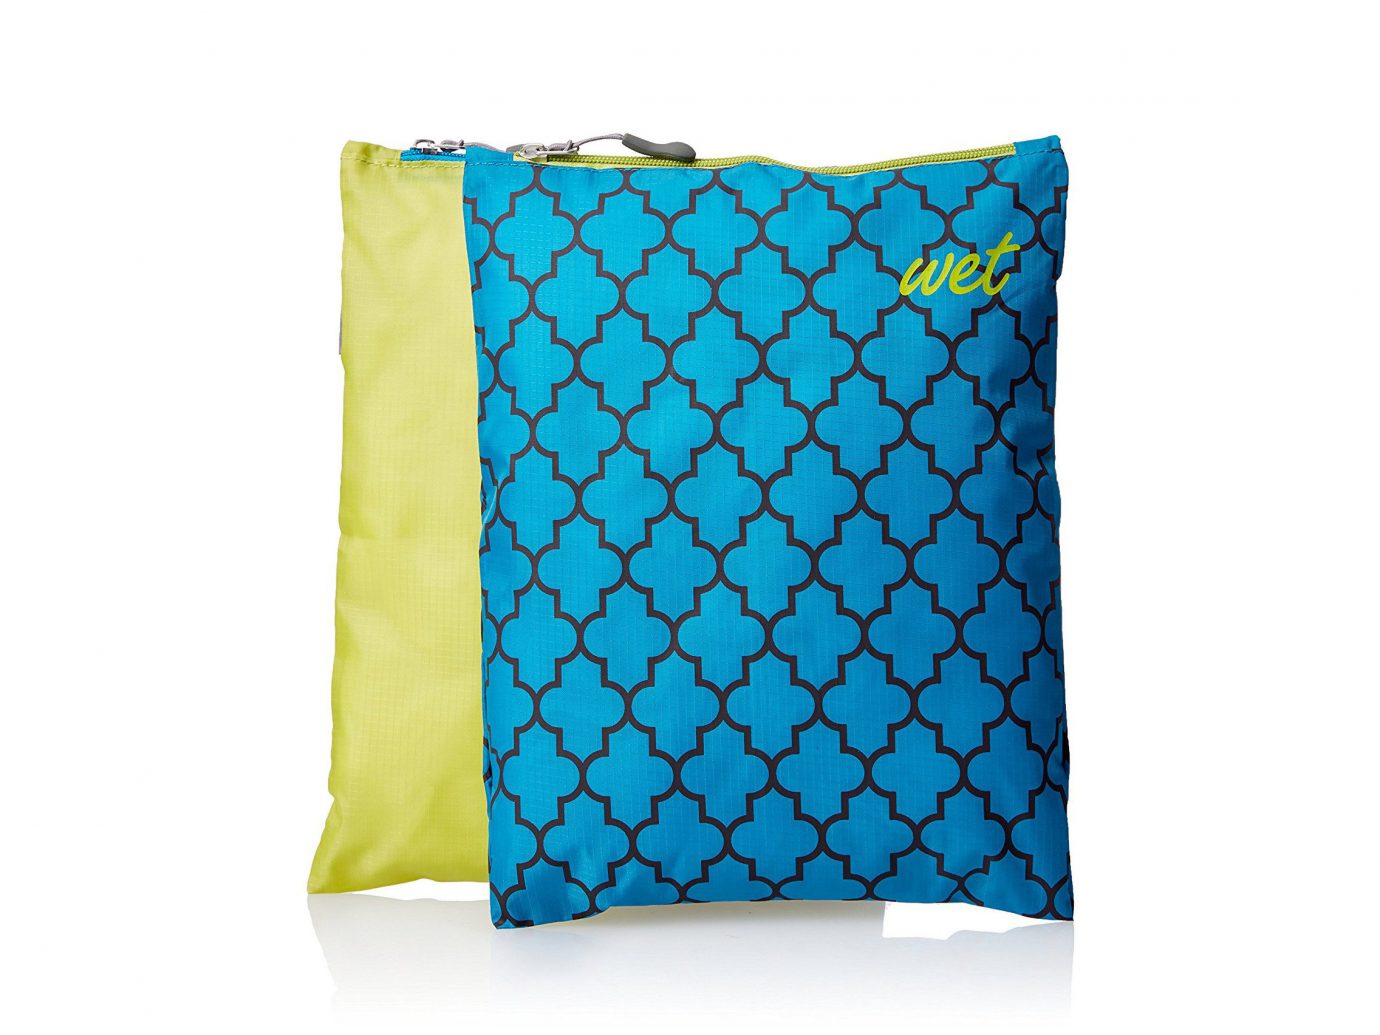 Packing Tips Travel Shop Travel Tips throw pillow aqua teal product turquoise cushion pattern electric blue pillow rectangle